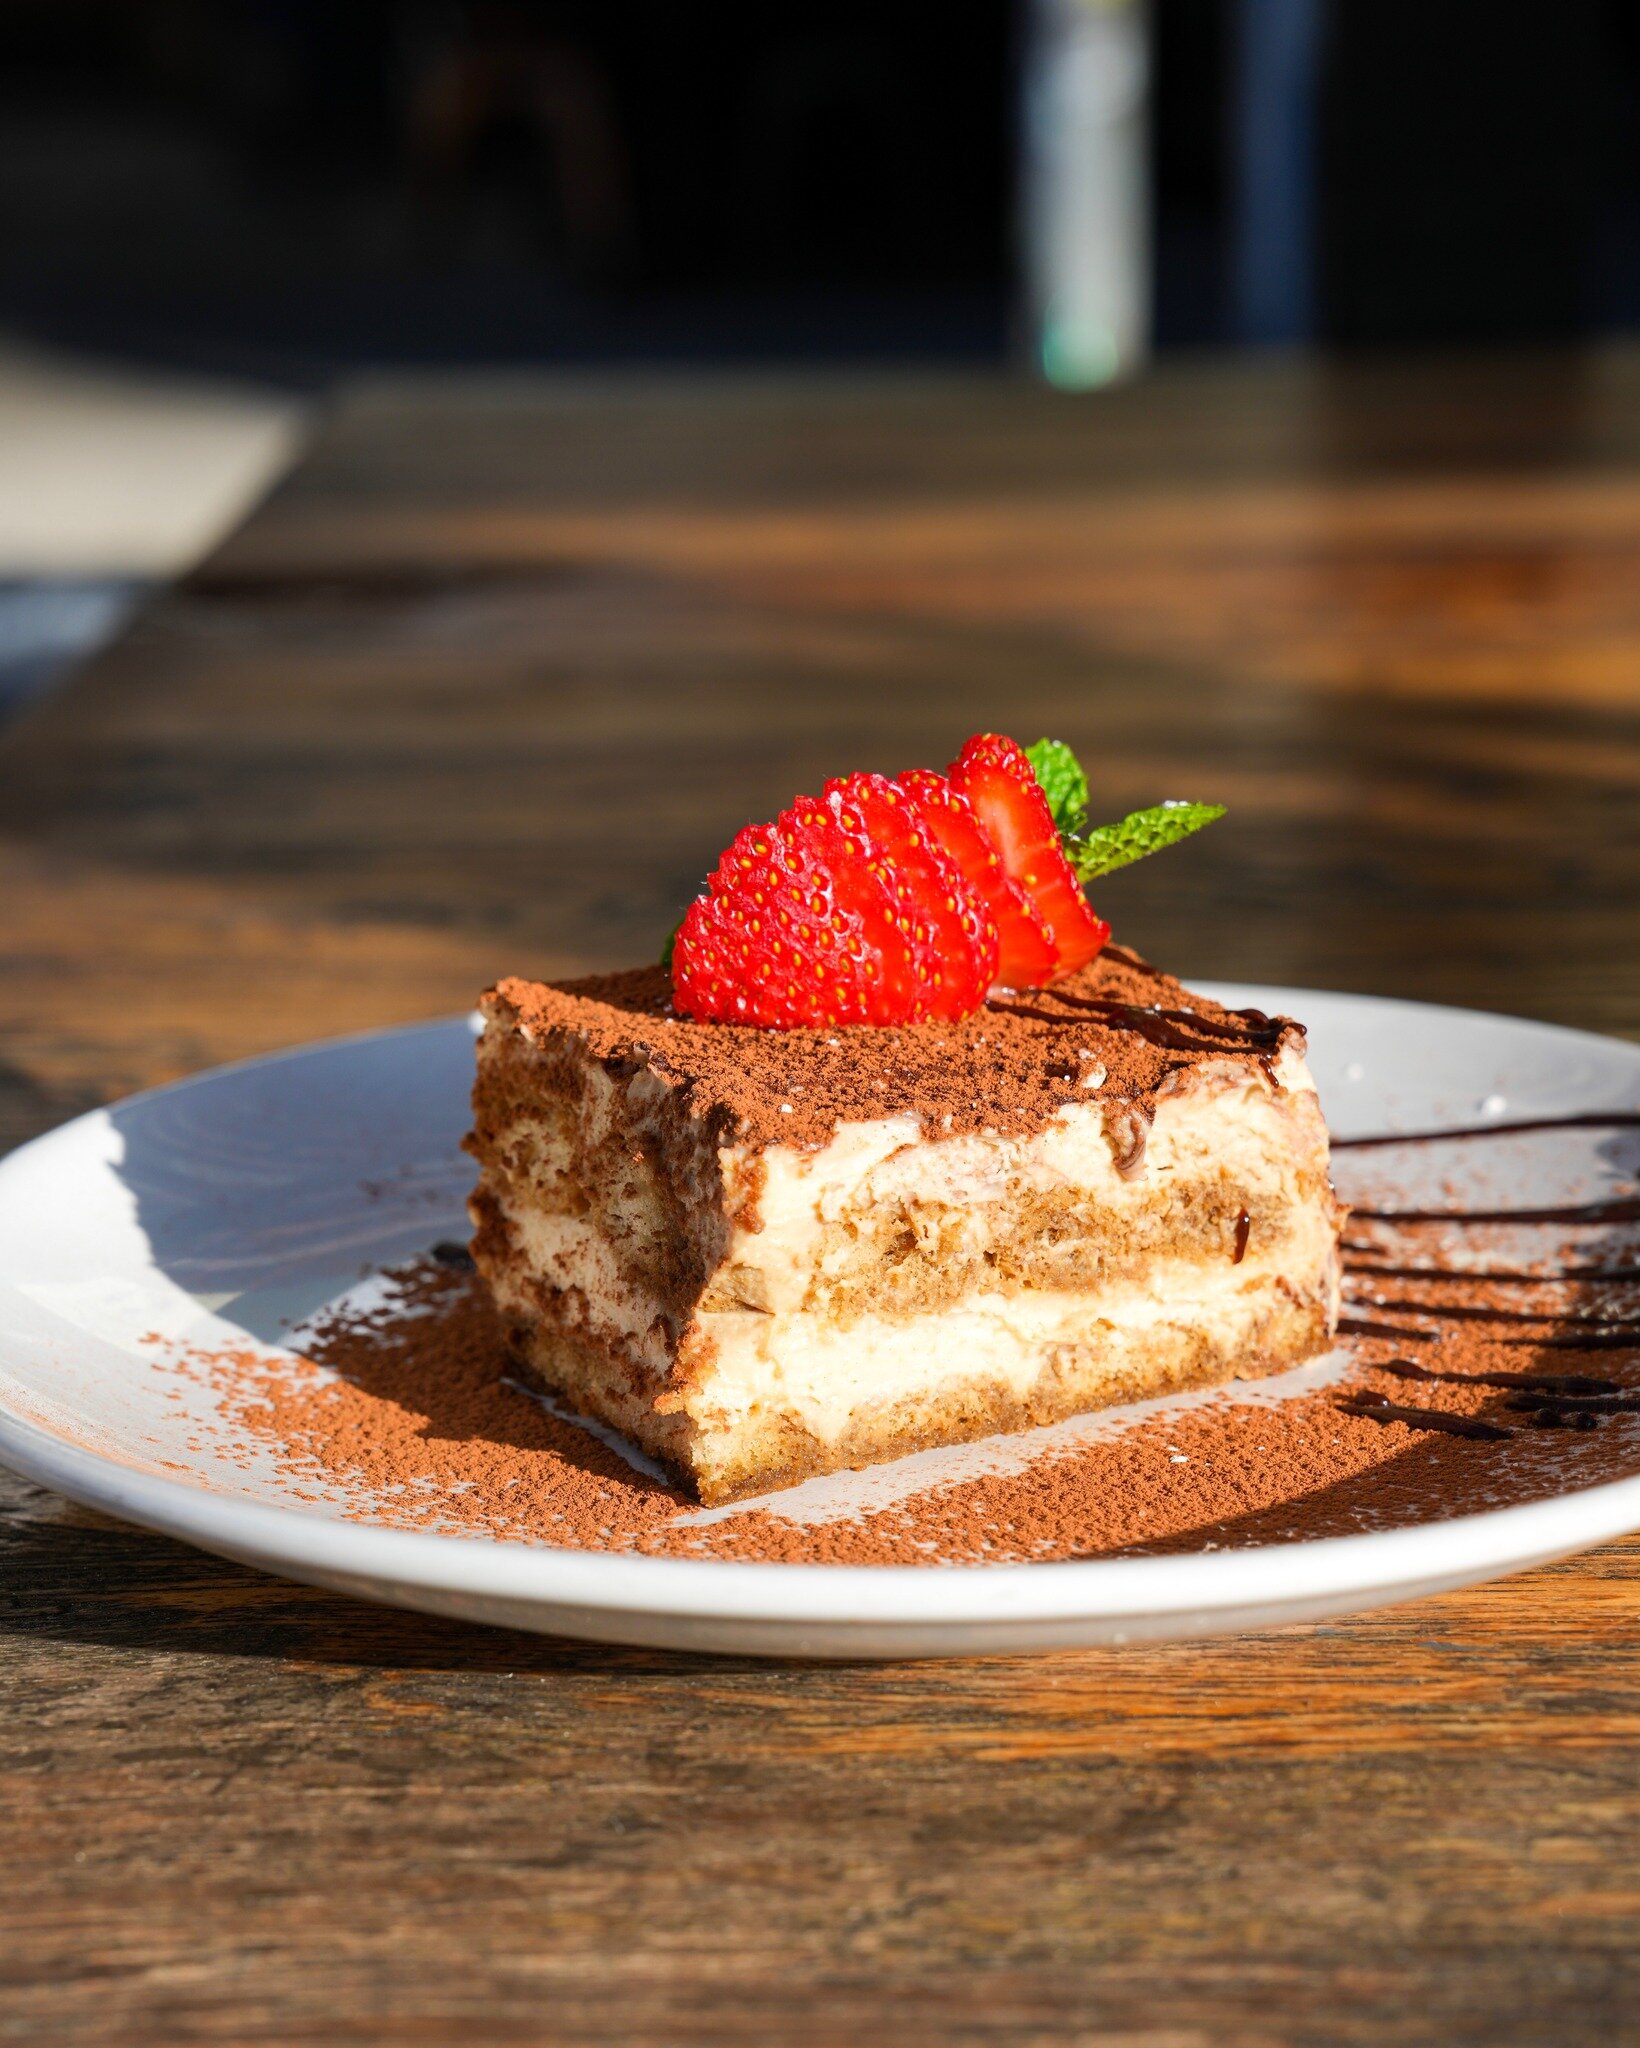 Don't let Sunday Scaries get you down - come in and treat yourself to a slice of heavenly Tiramisu at our restaurant! This classic Italian dessert features delicate ladyfingers soaked in rich espresso and layered with luscious whipped mascarpone crea